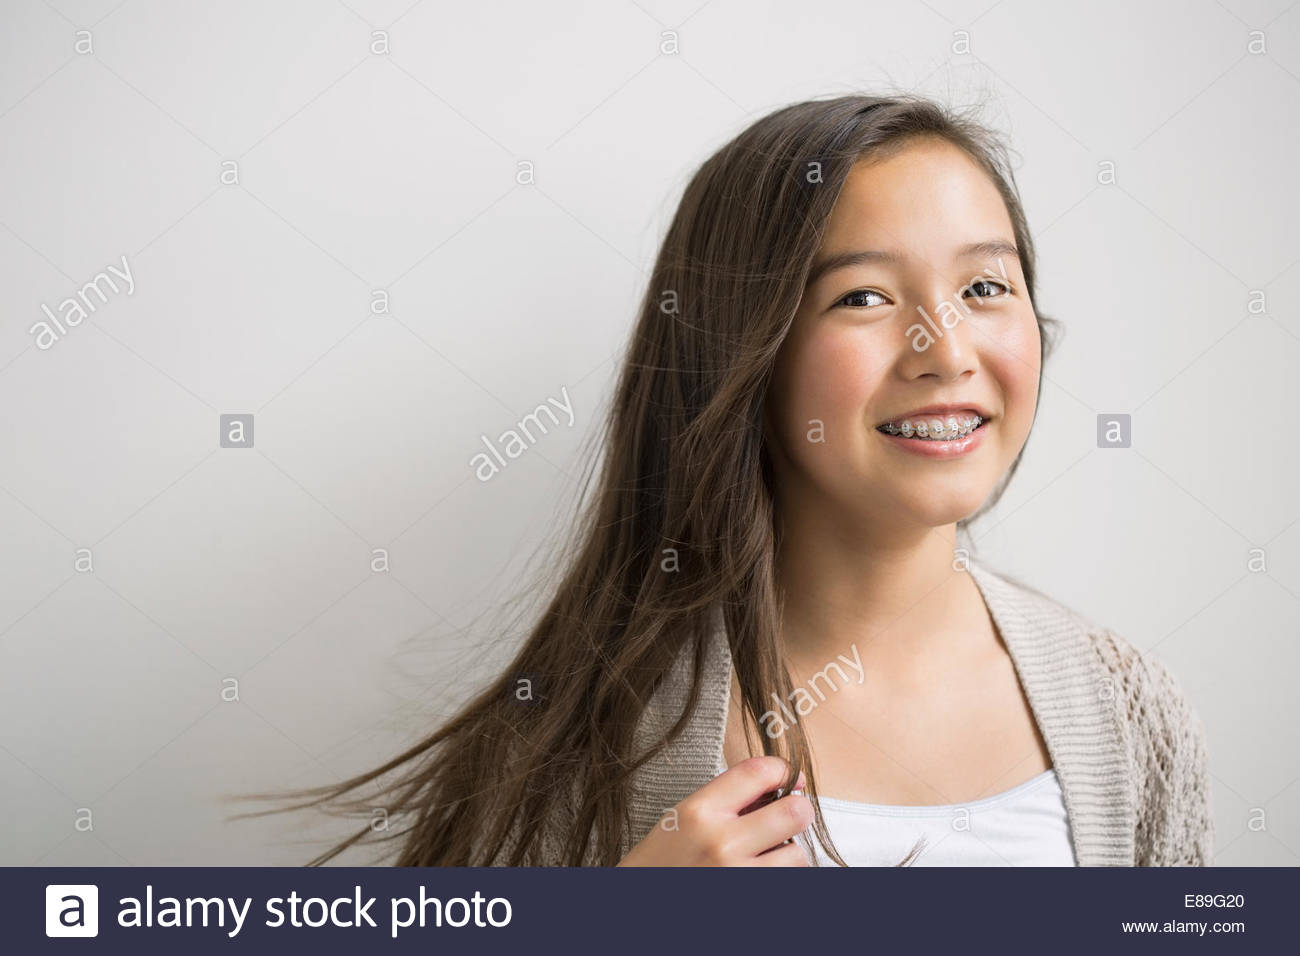 Portrait of smiling brunette girl with braces Stock Photo